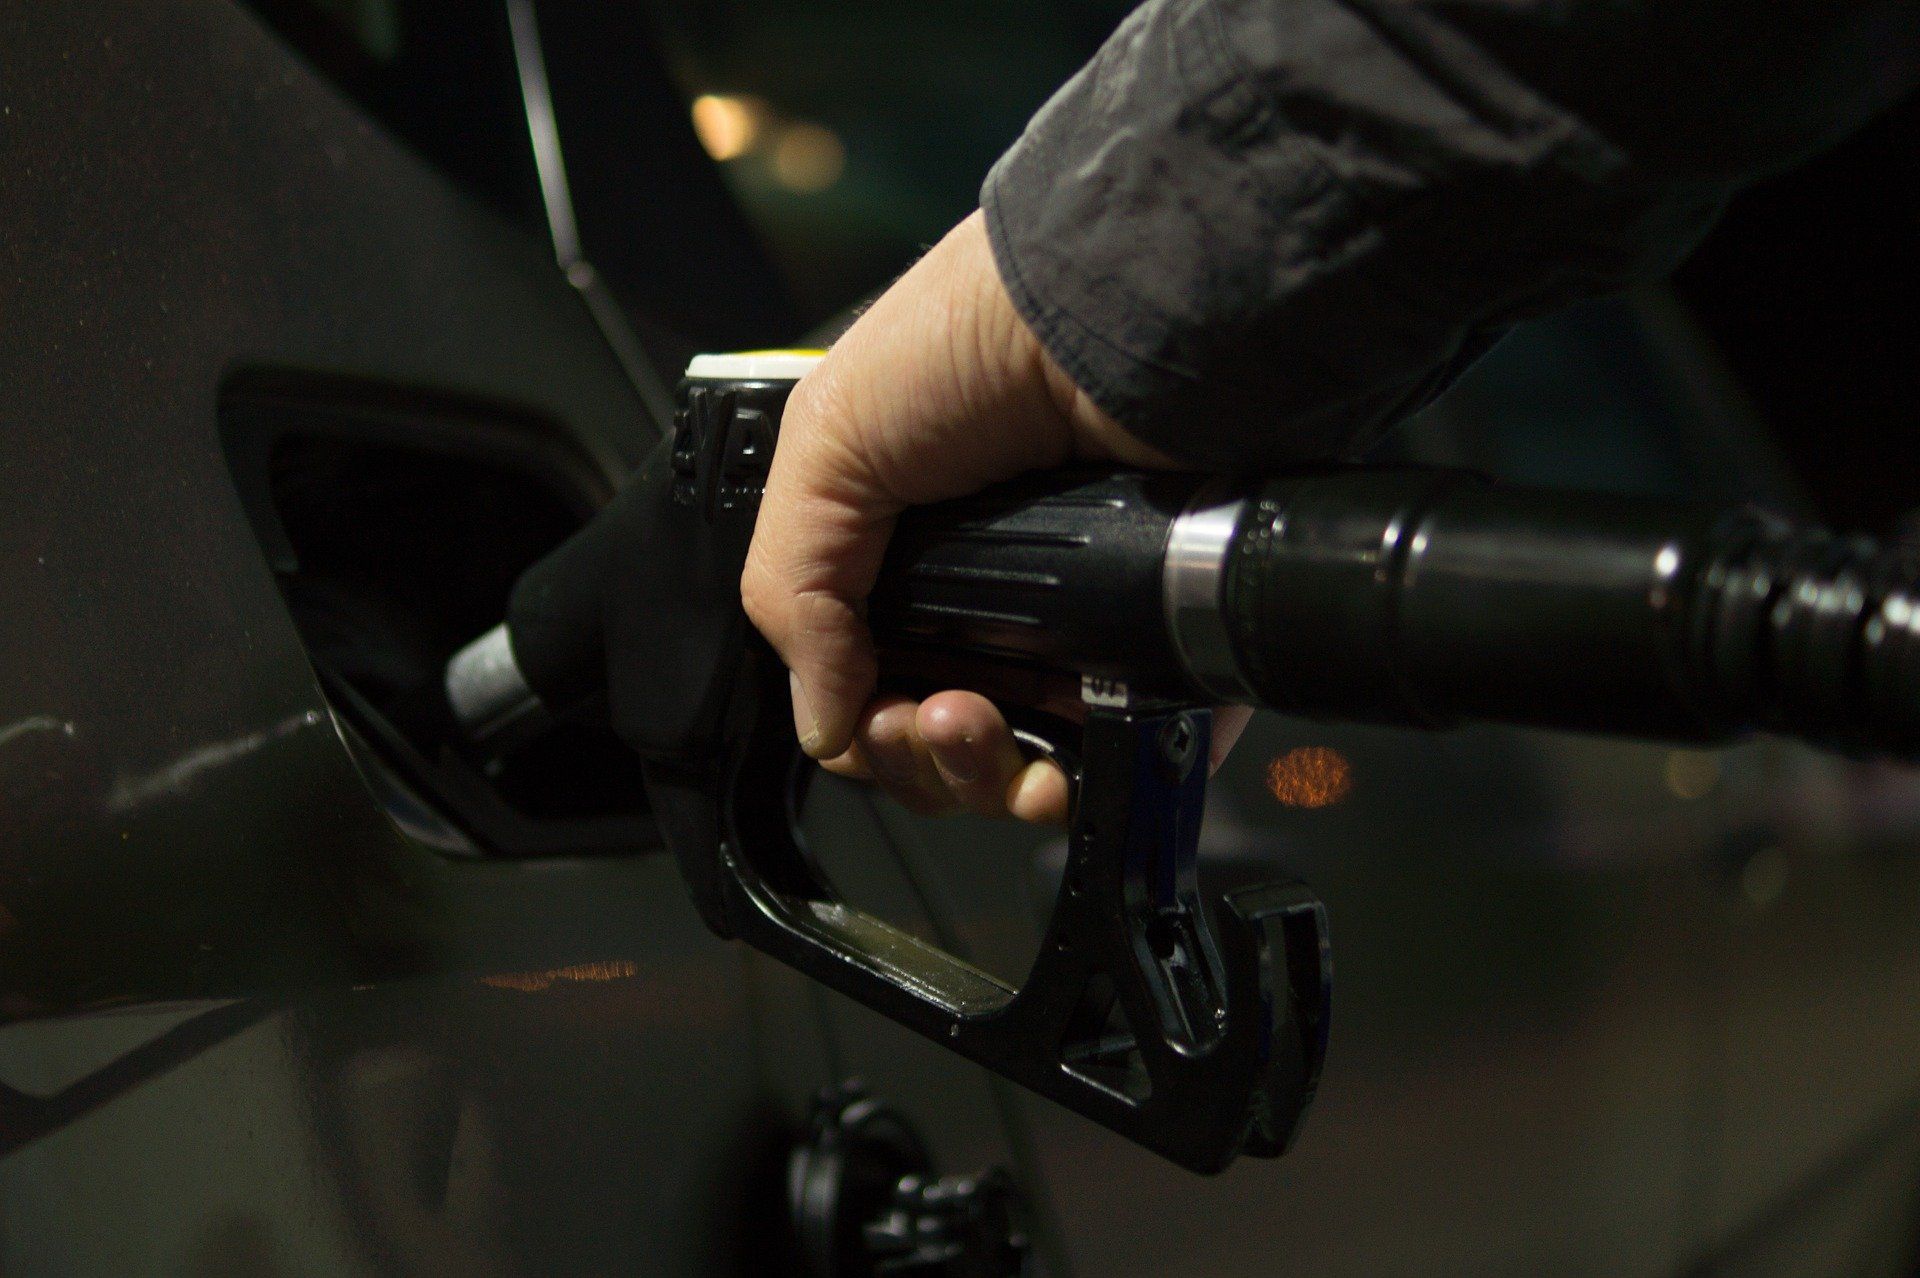 Fuel price today: Petrol and Diesel rates remain unchanged on May 16, 2022